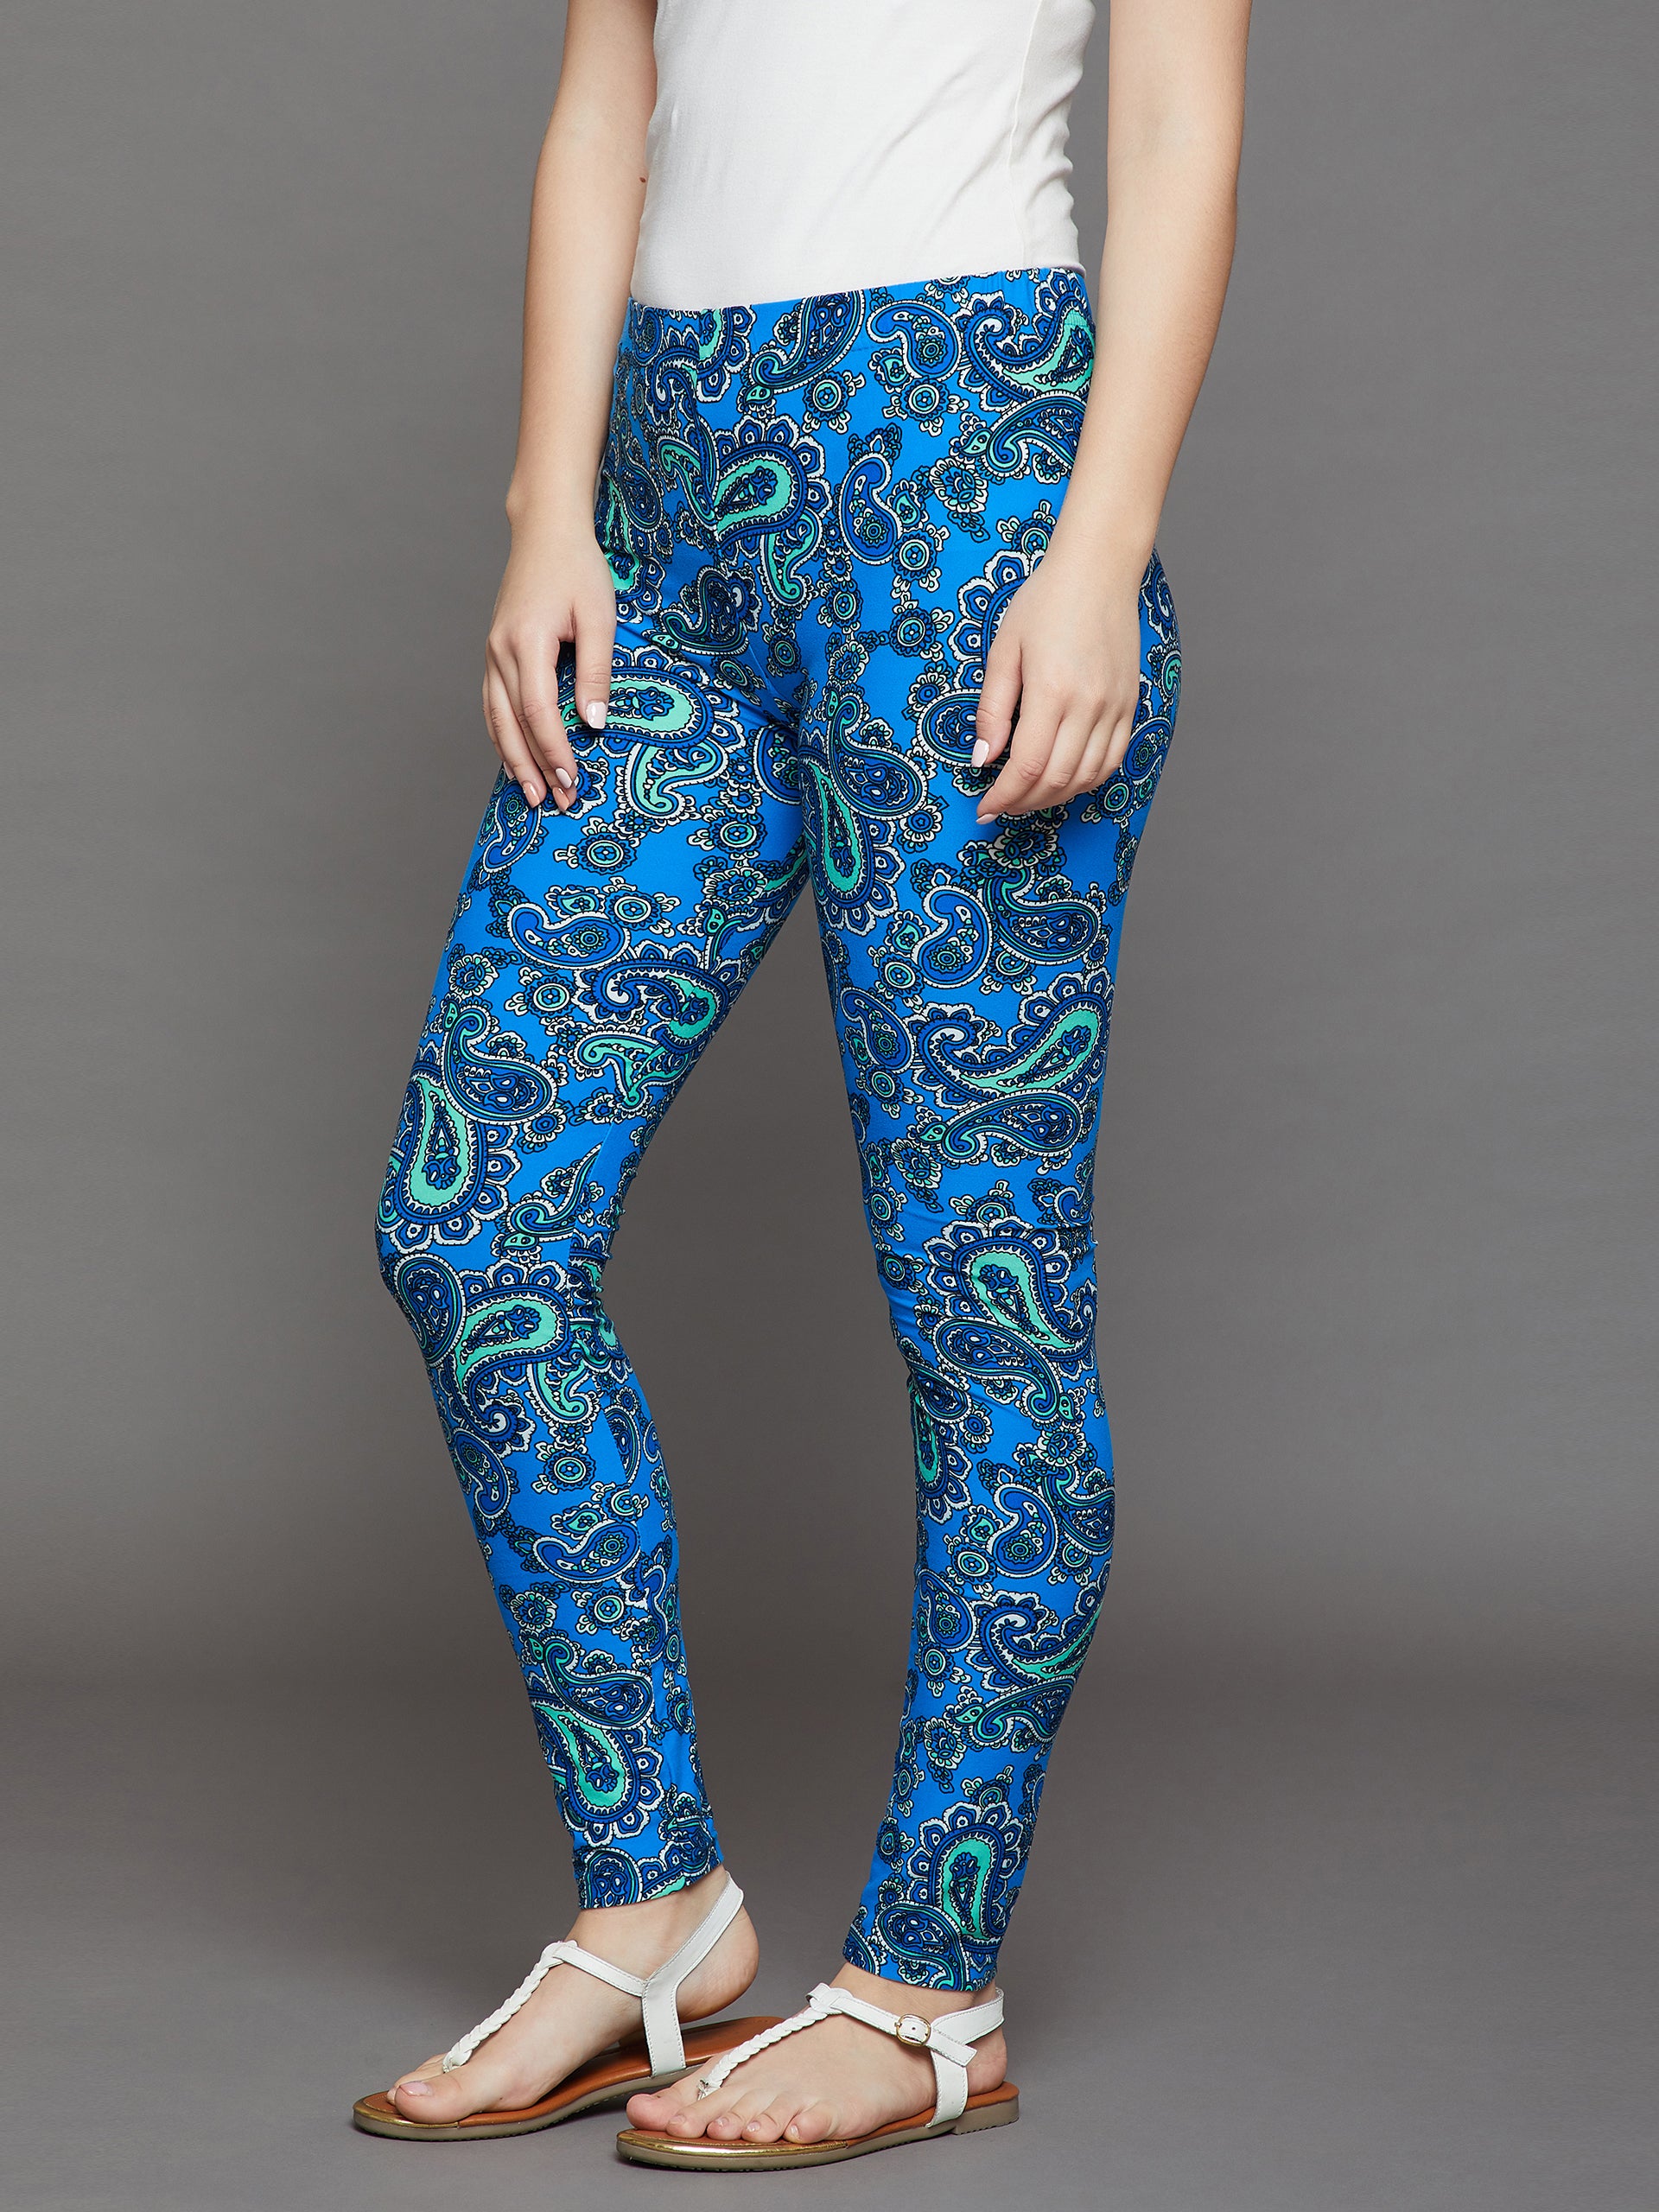 Tracy Miller Collections | mixed prints activewear/leggings/lapis